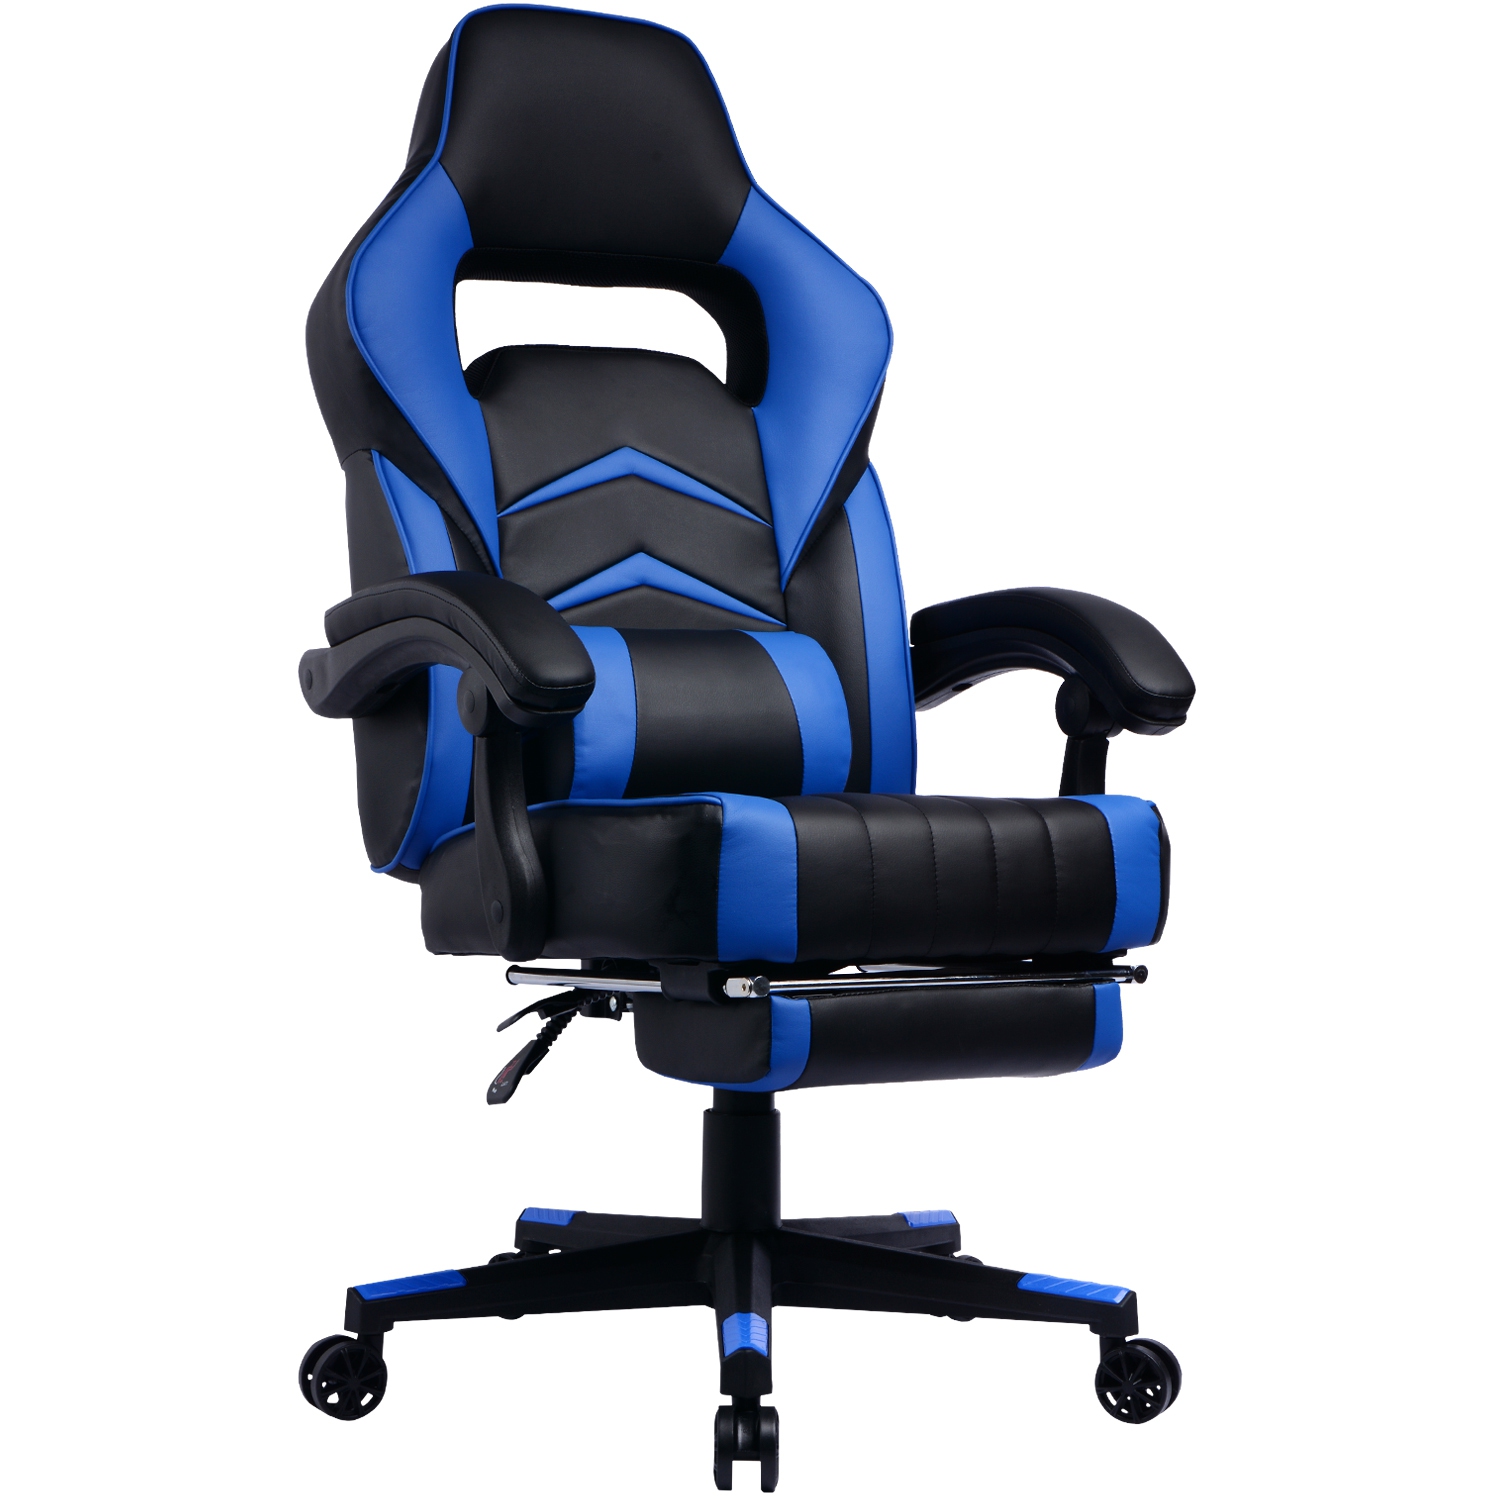 GamingChair Ergonomic PU Padded Leather Racing Gaming Chair with Extendable Footrest & Reclining Backrest (Blue)